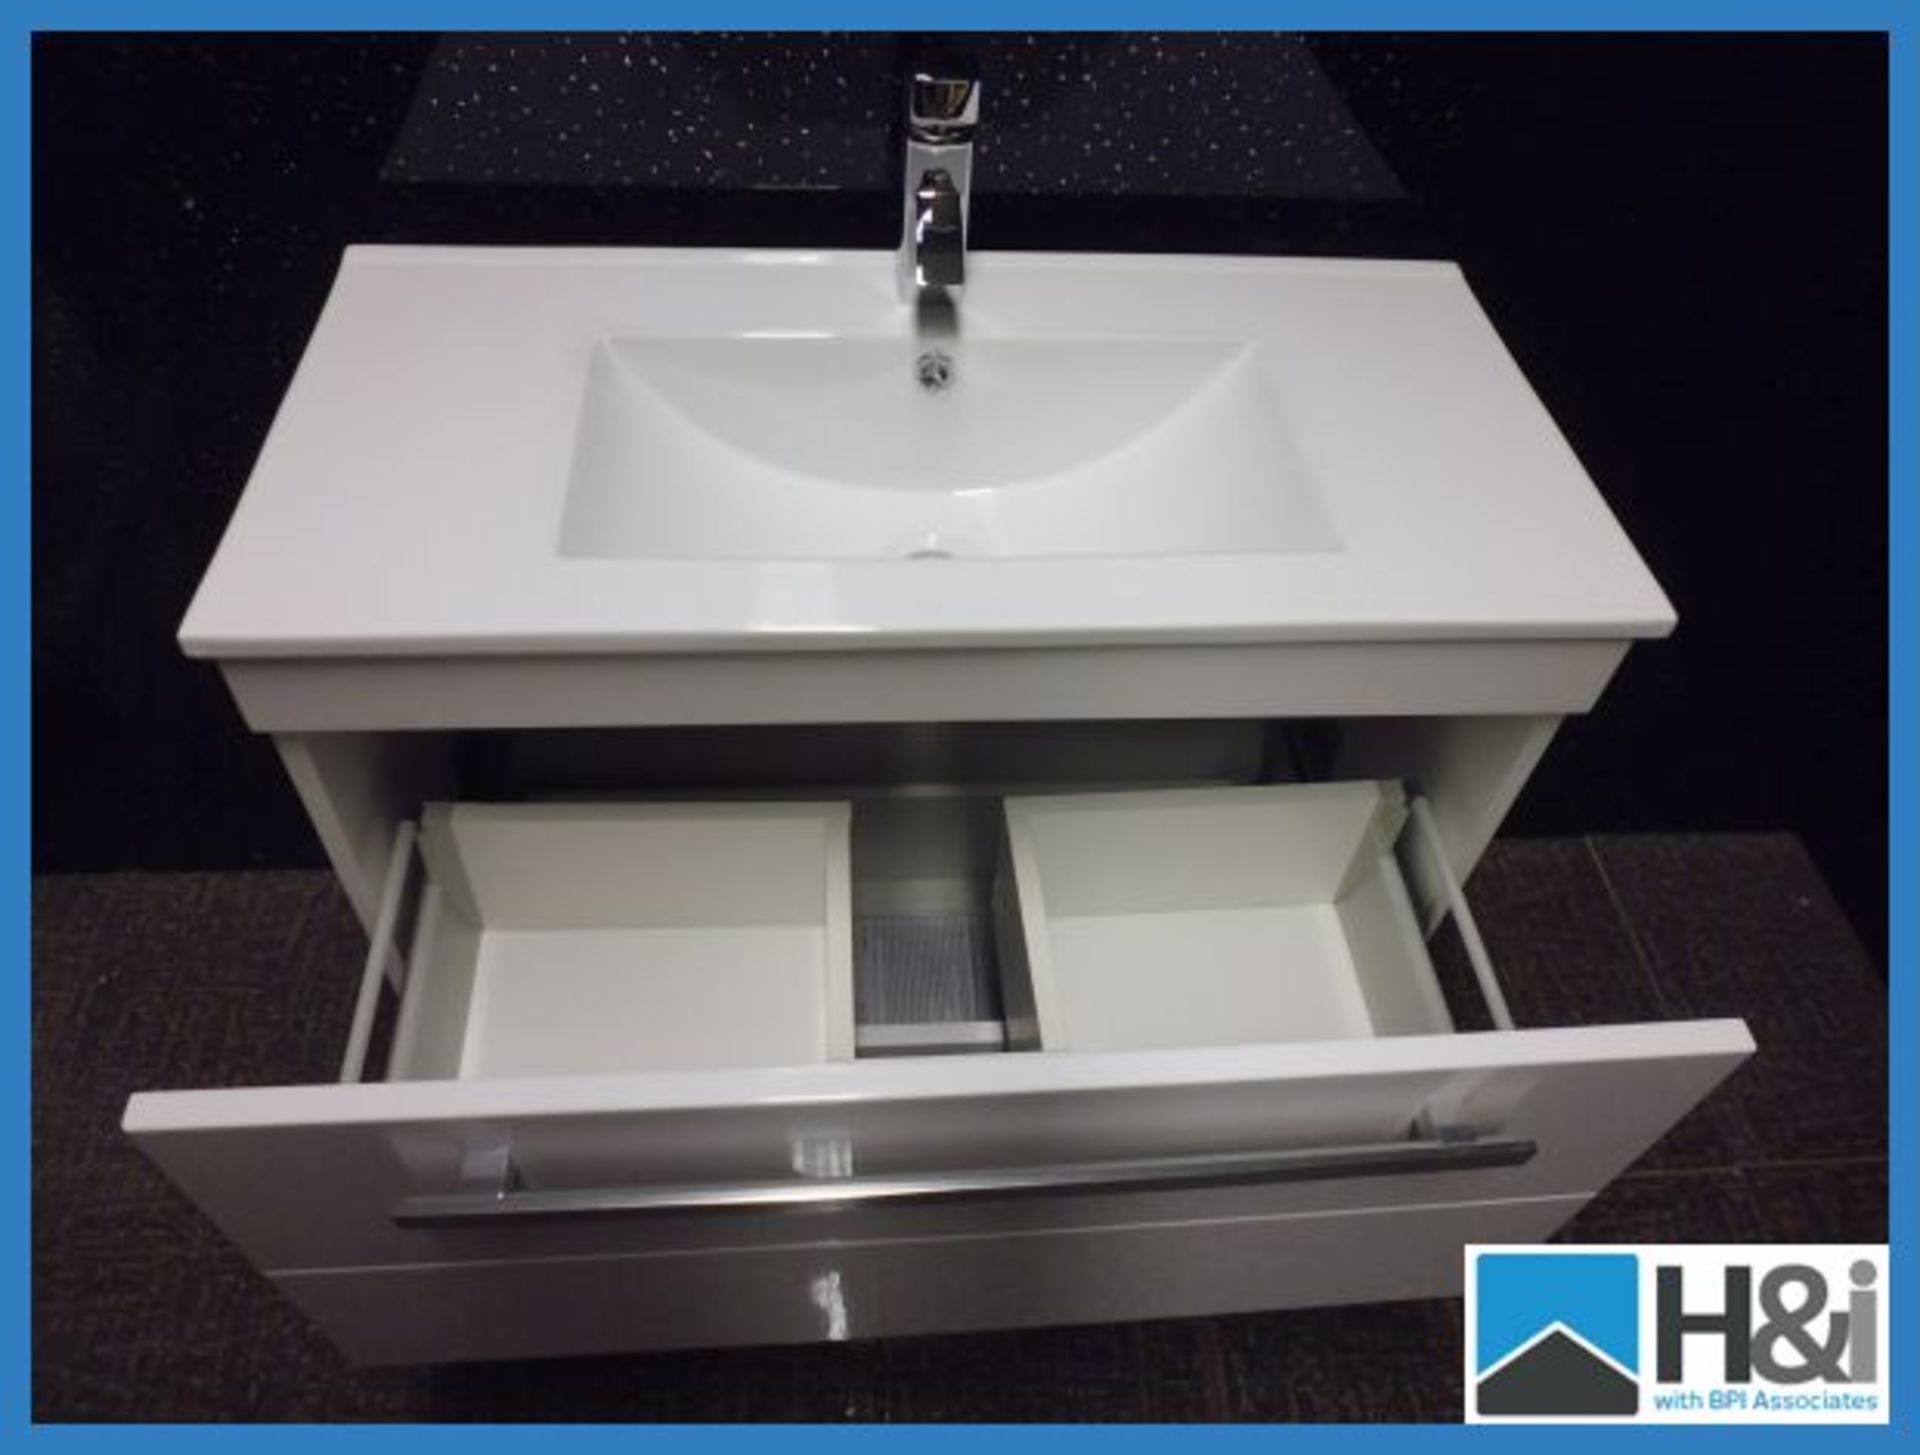 Designer Floor Mounted Minimalist Basin & Cabinet in Gloss White with 2 Soft Close Drawers. Comes - Image 3 of 5